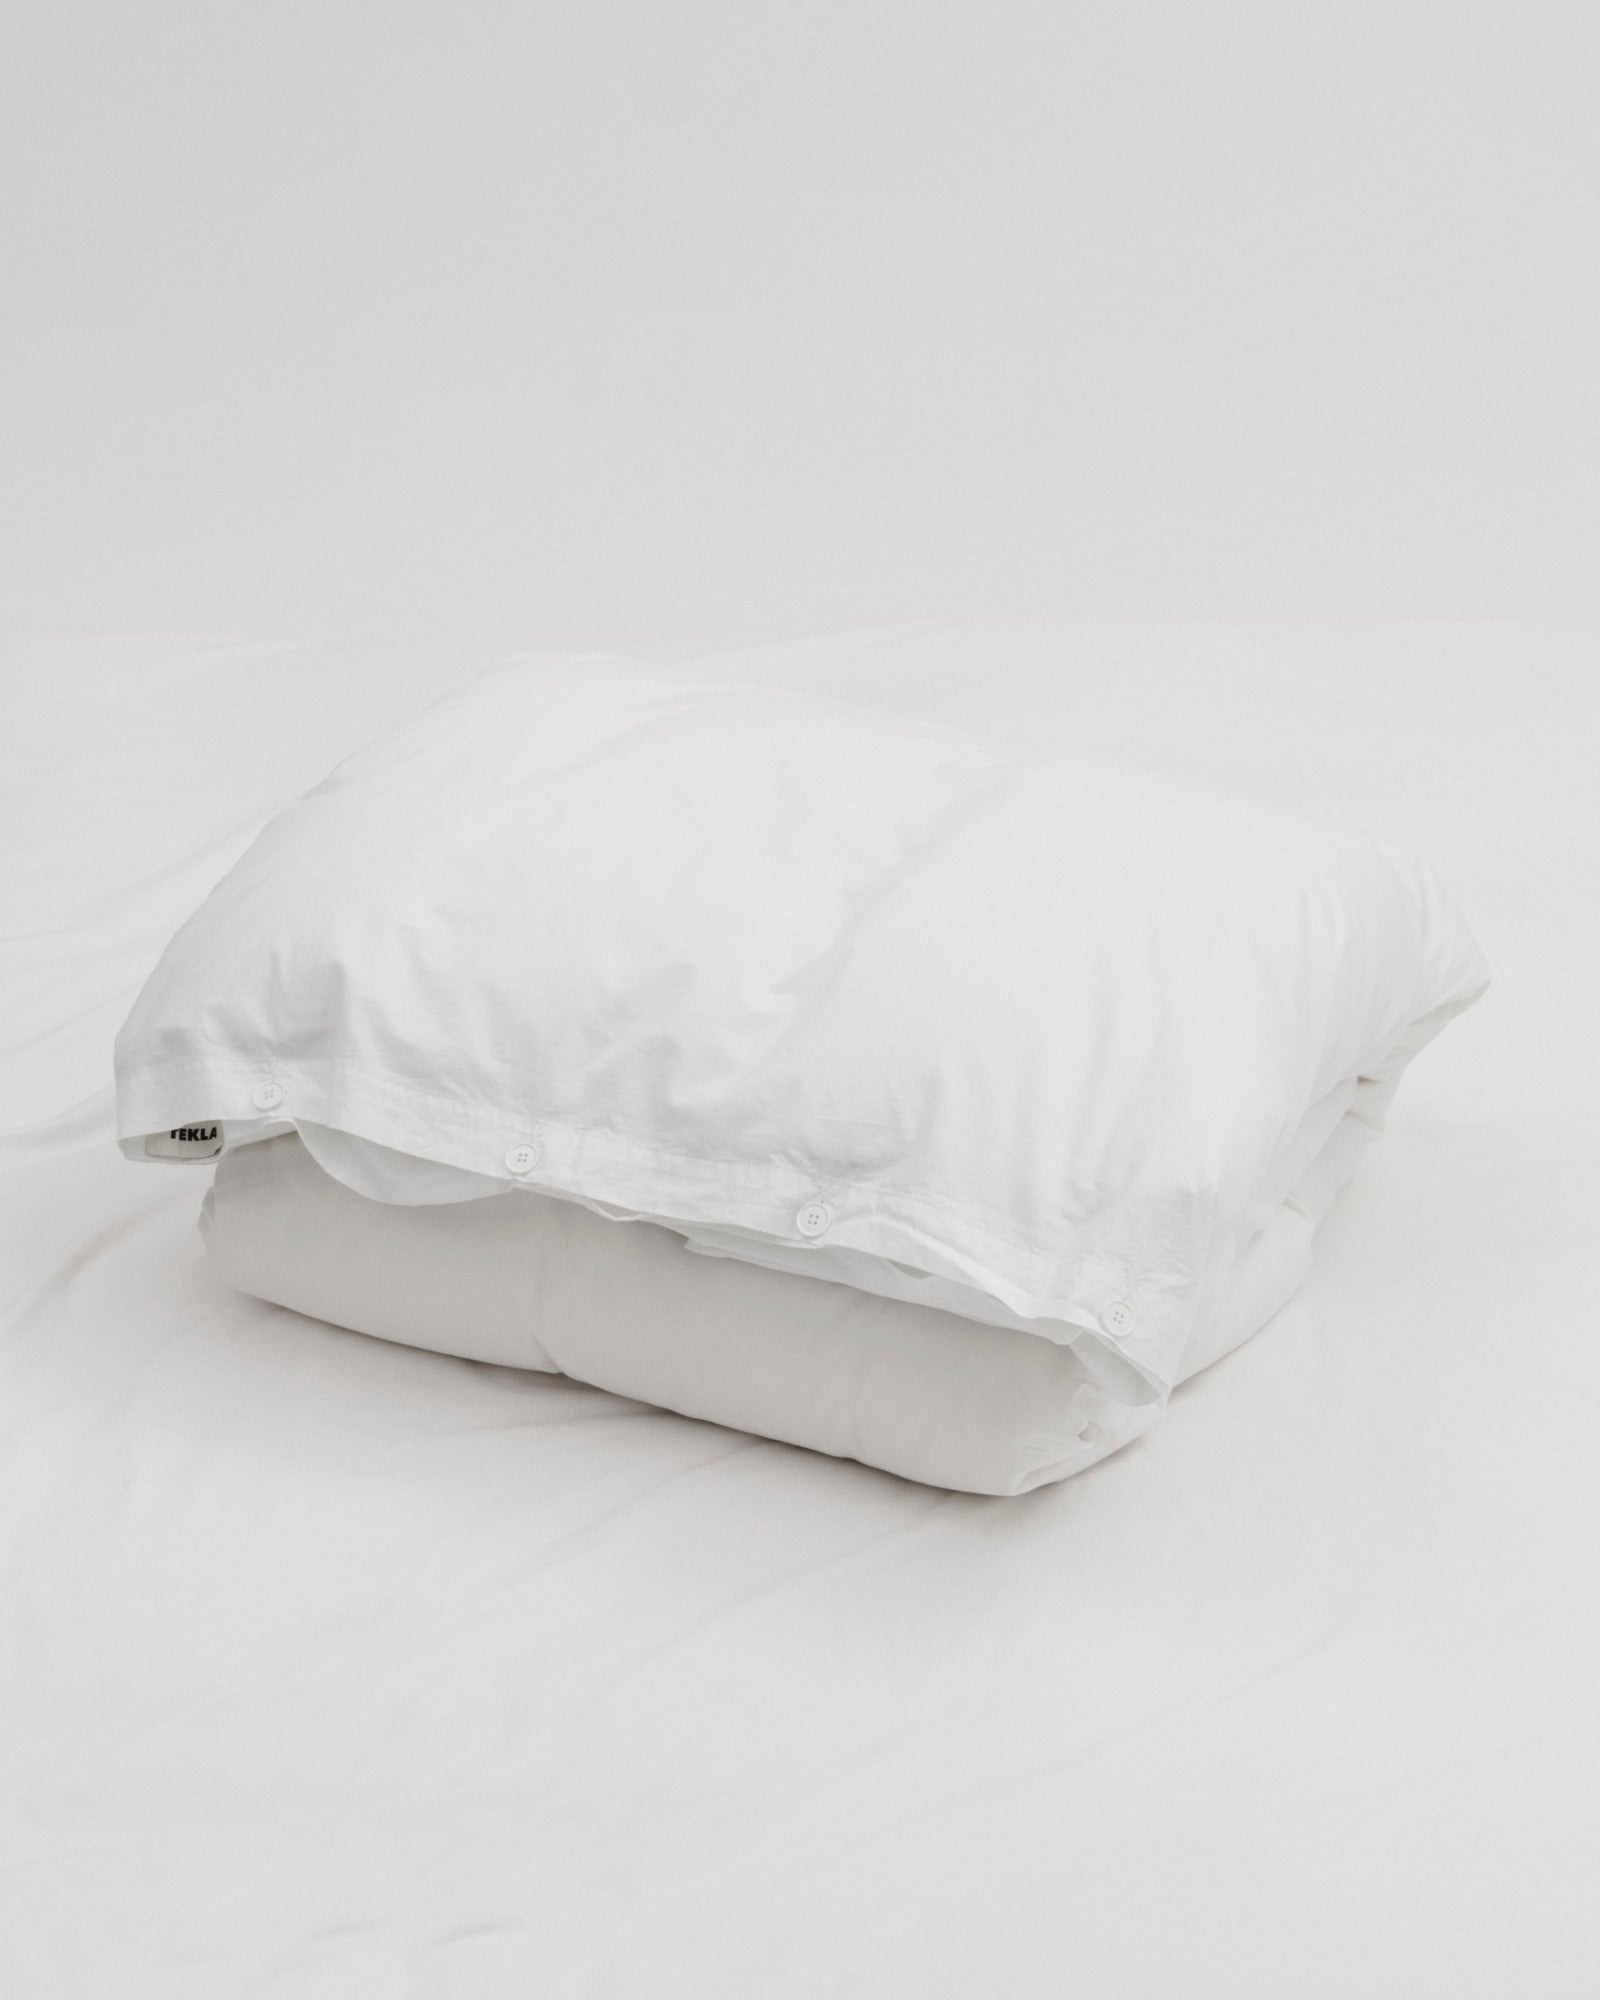 Percale Double Duvet Cover King